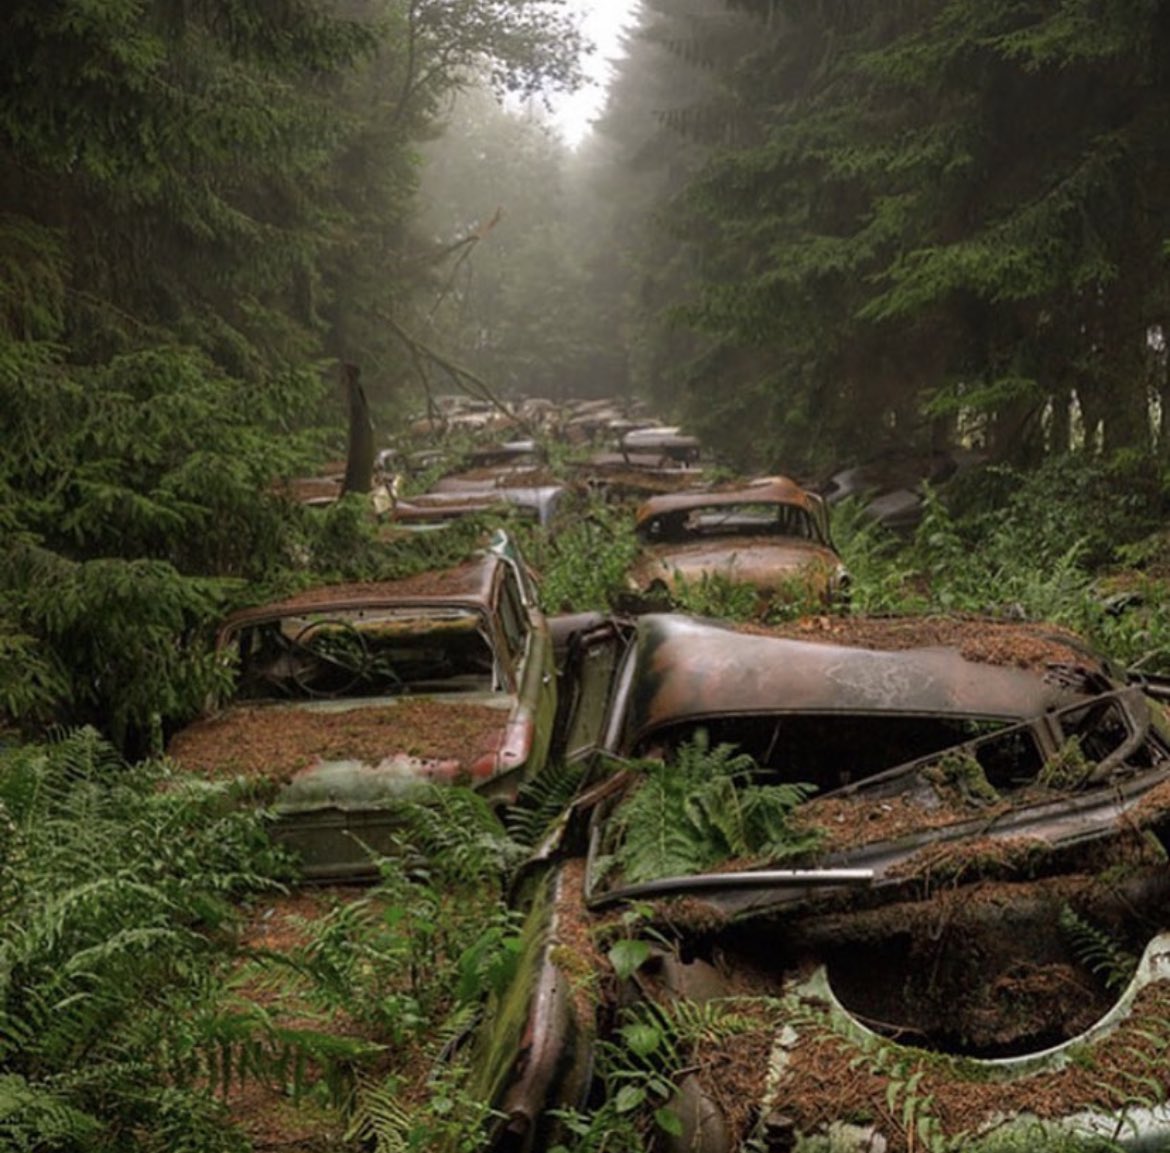 Abandoned traffic jam in a Belgian Forest. This is the Chatillion Car Graveyard, one of the world's largest abandoned car graveyards, left untouched for over 60 years.

A fun urban legend sprang up through the years that the cars were left behind by US soldiers from the Second